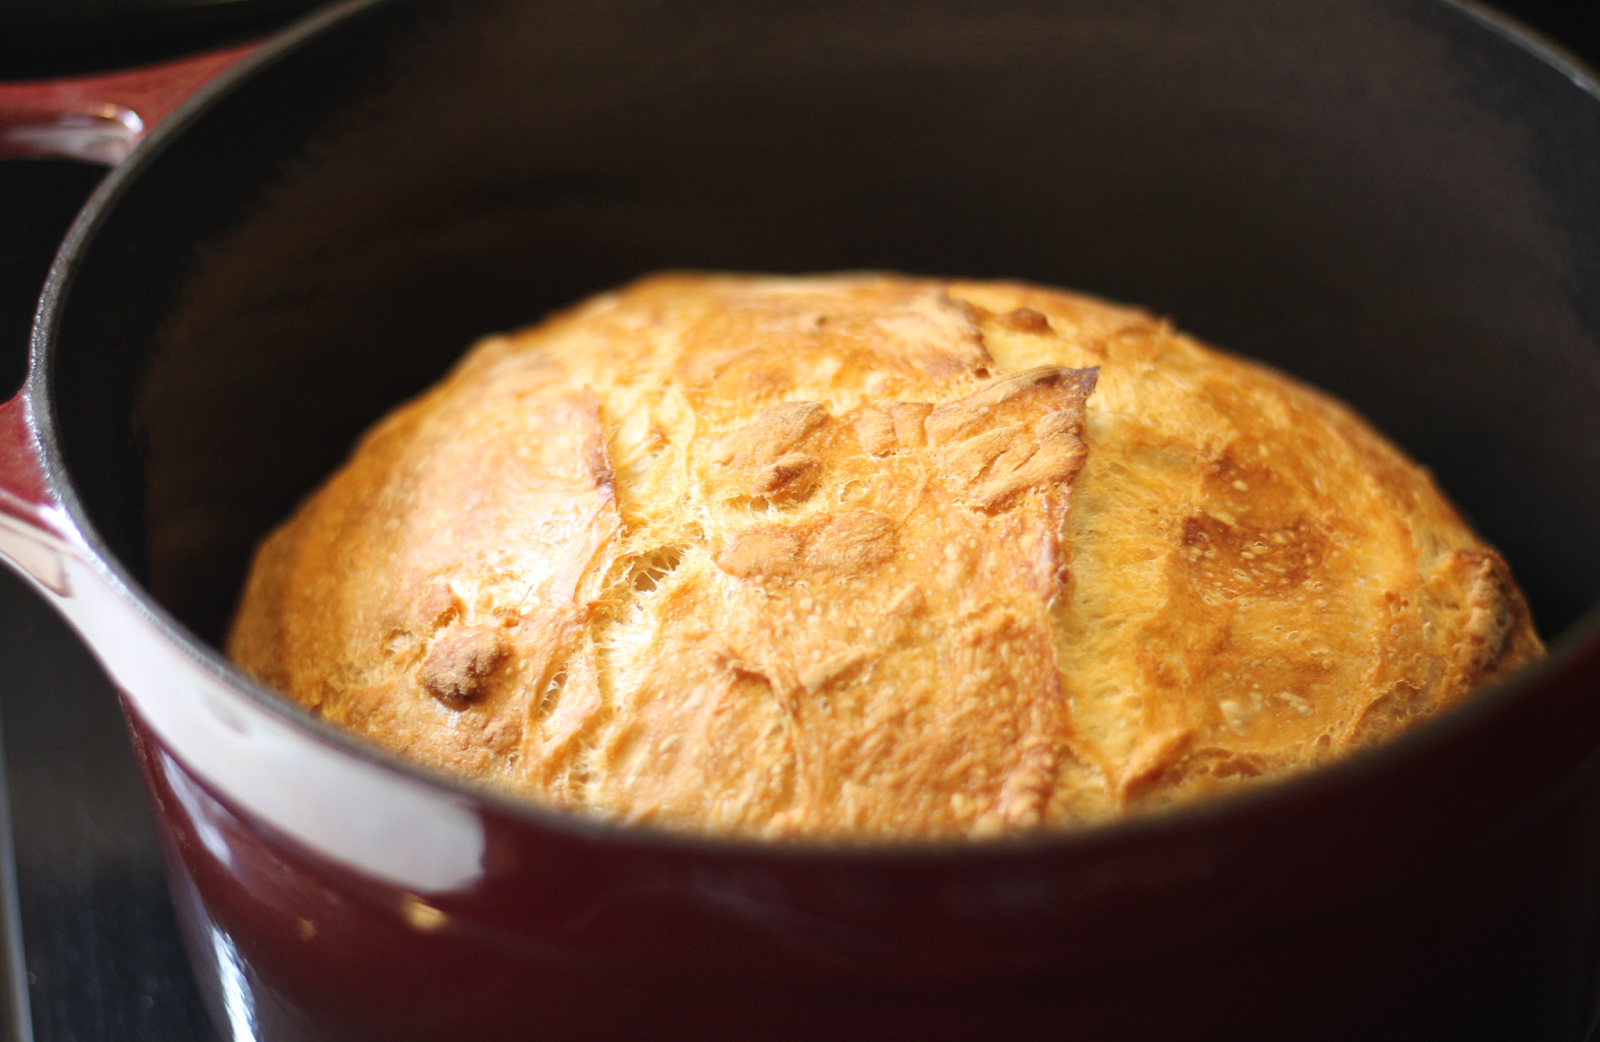 Bake Bread in Your Dutch Oven - Hobby Farms